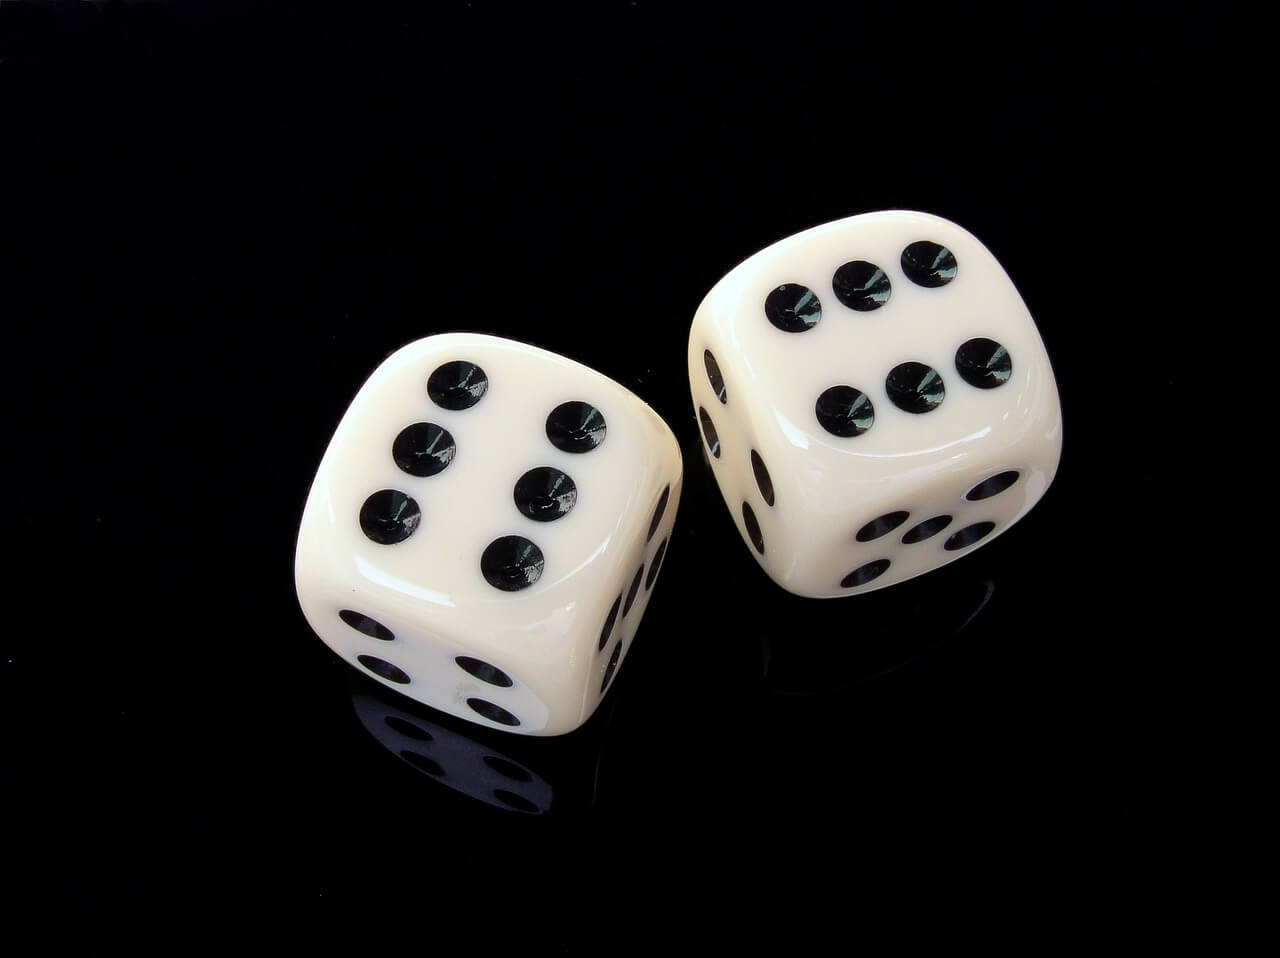 6 (Craps Term) and How It Impacts Your Game Strategy